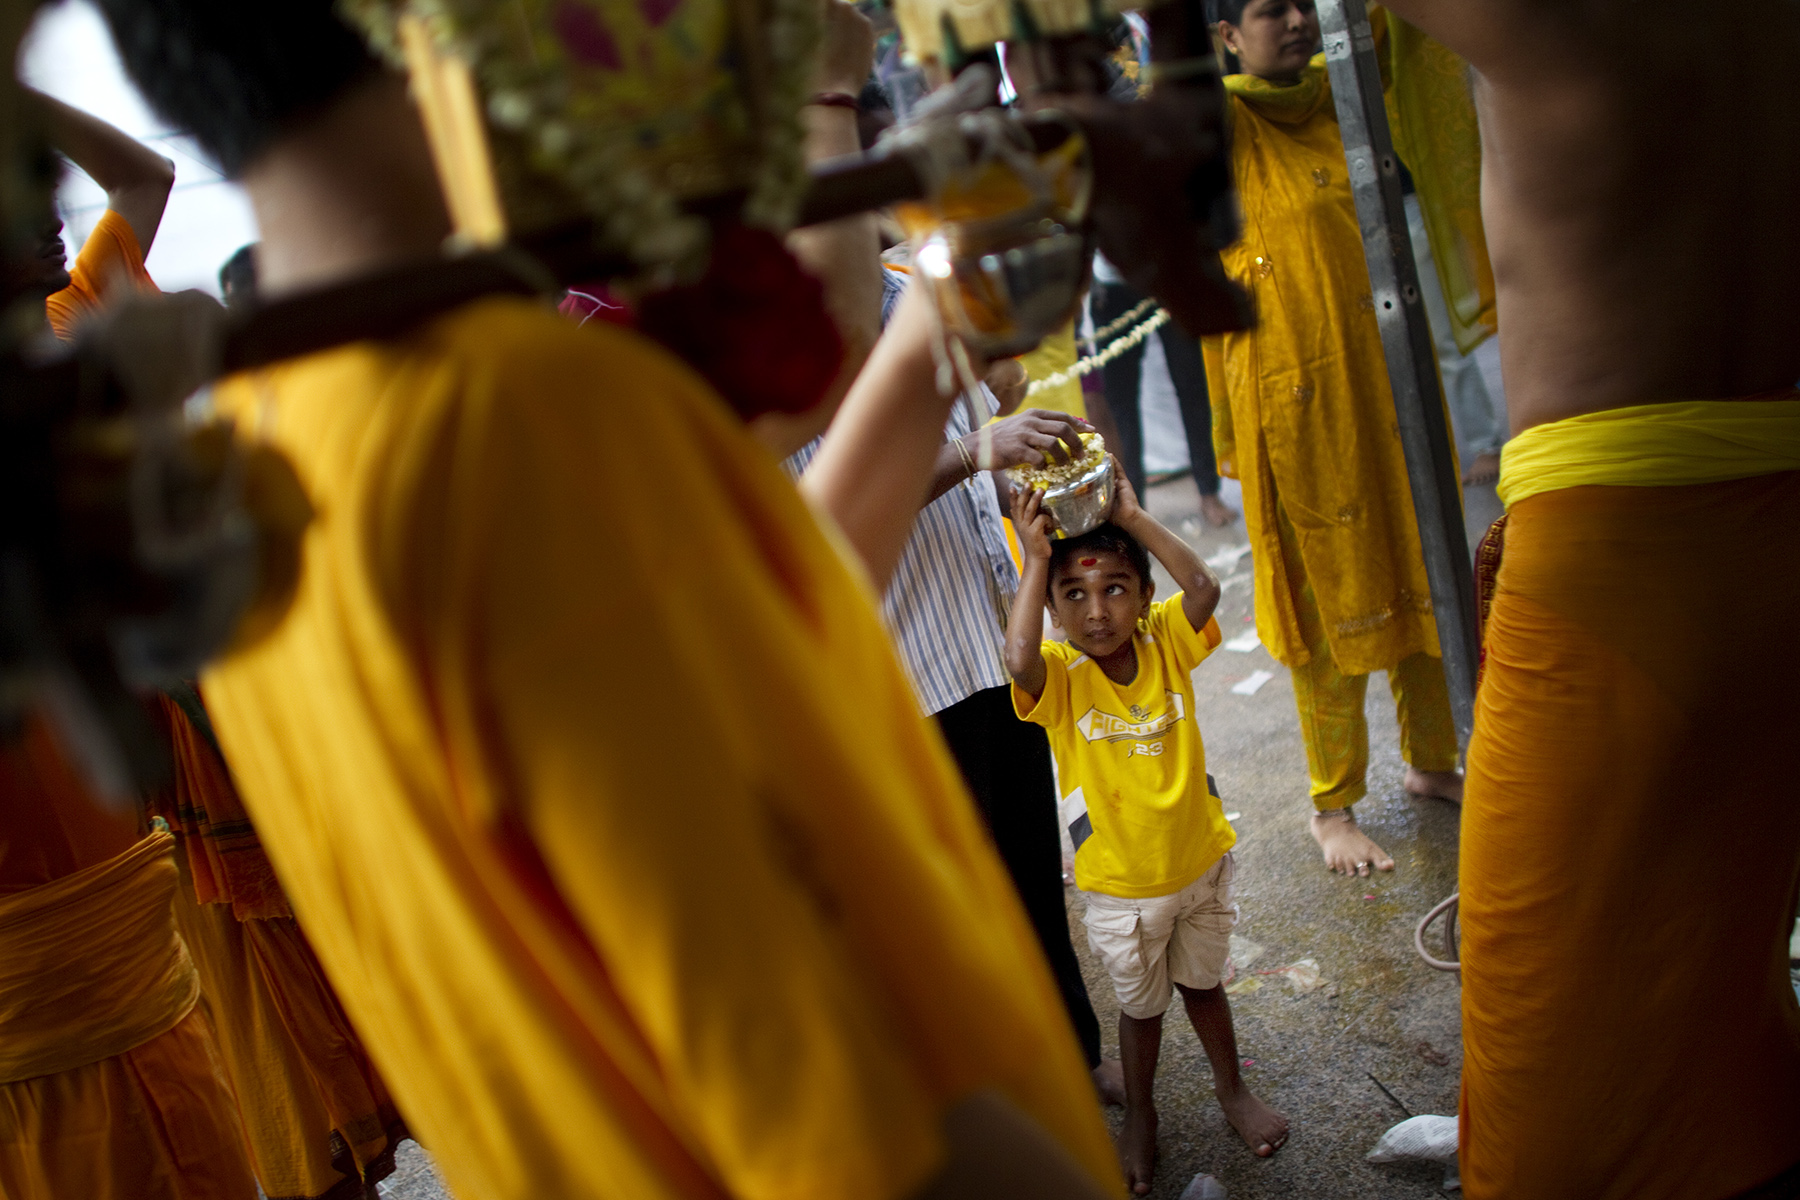 A young boy dressed in yellow, stands between adults, and holds a milk pot on his head before taking part in the Hindu Thaipusam procession 

